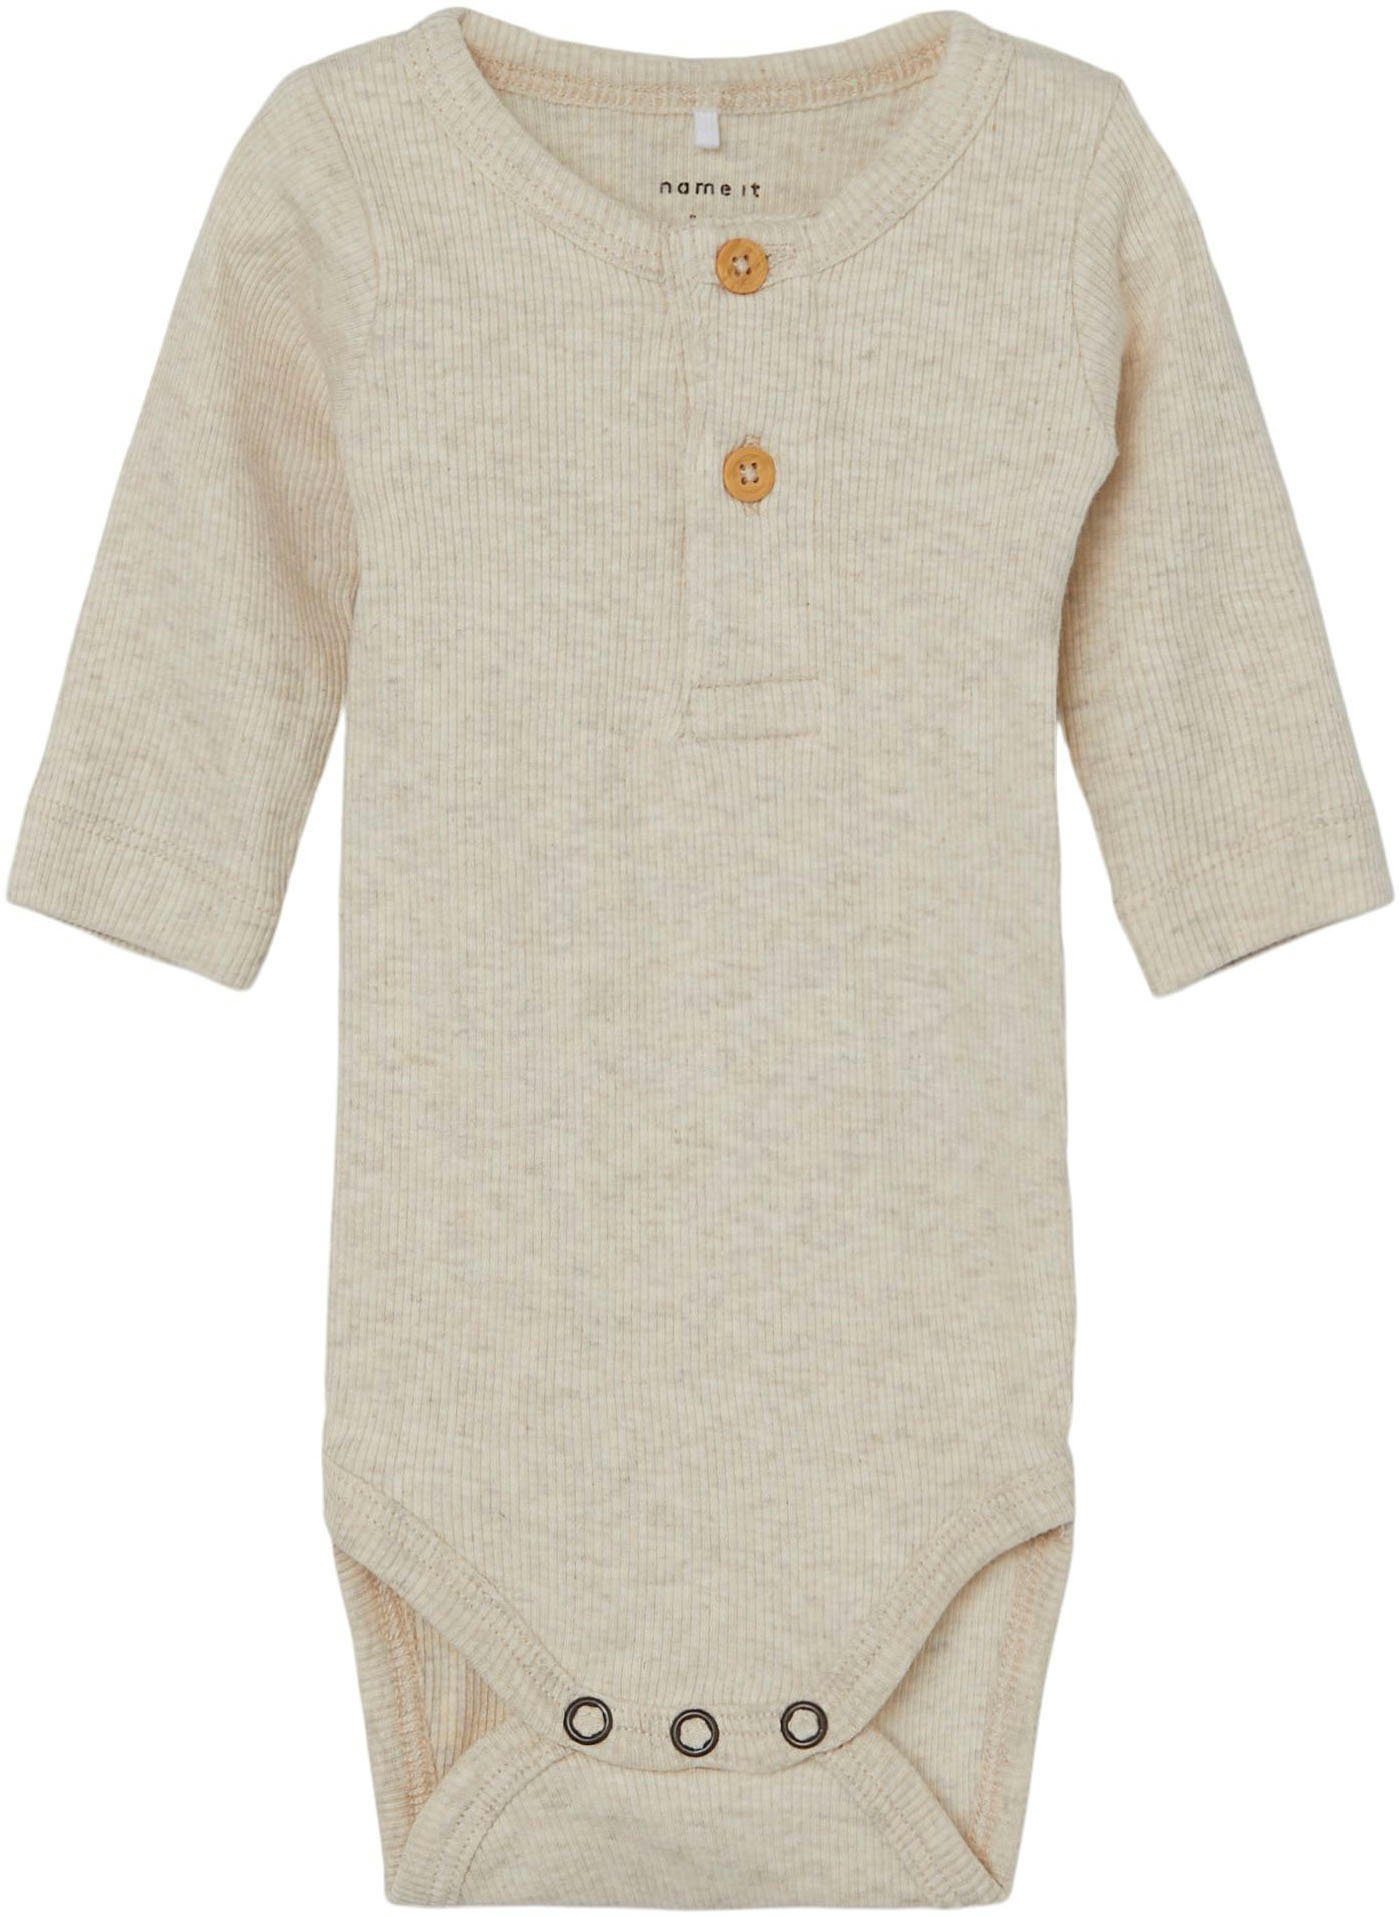 Baby's Only Online-Shop | OTTO